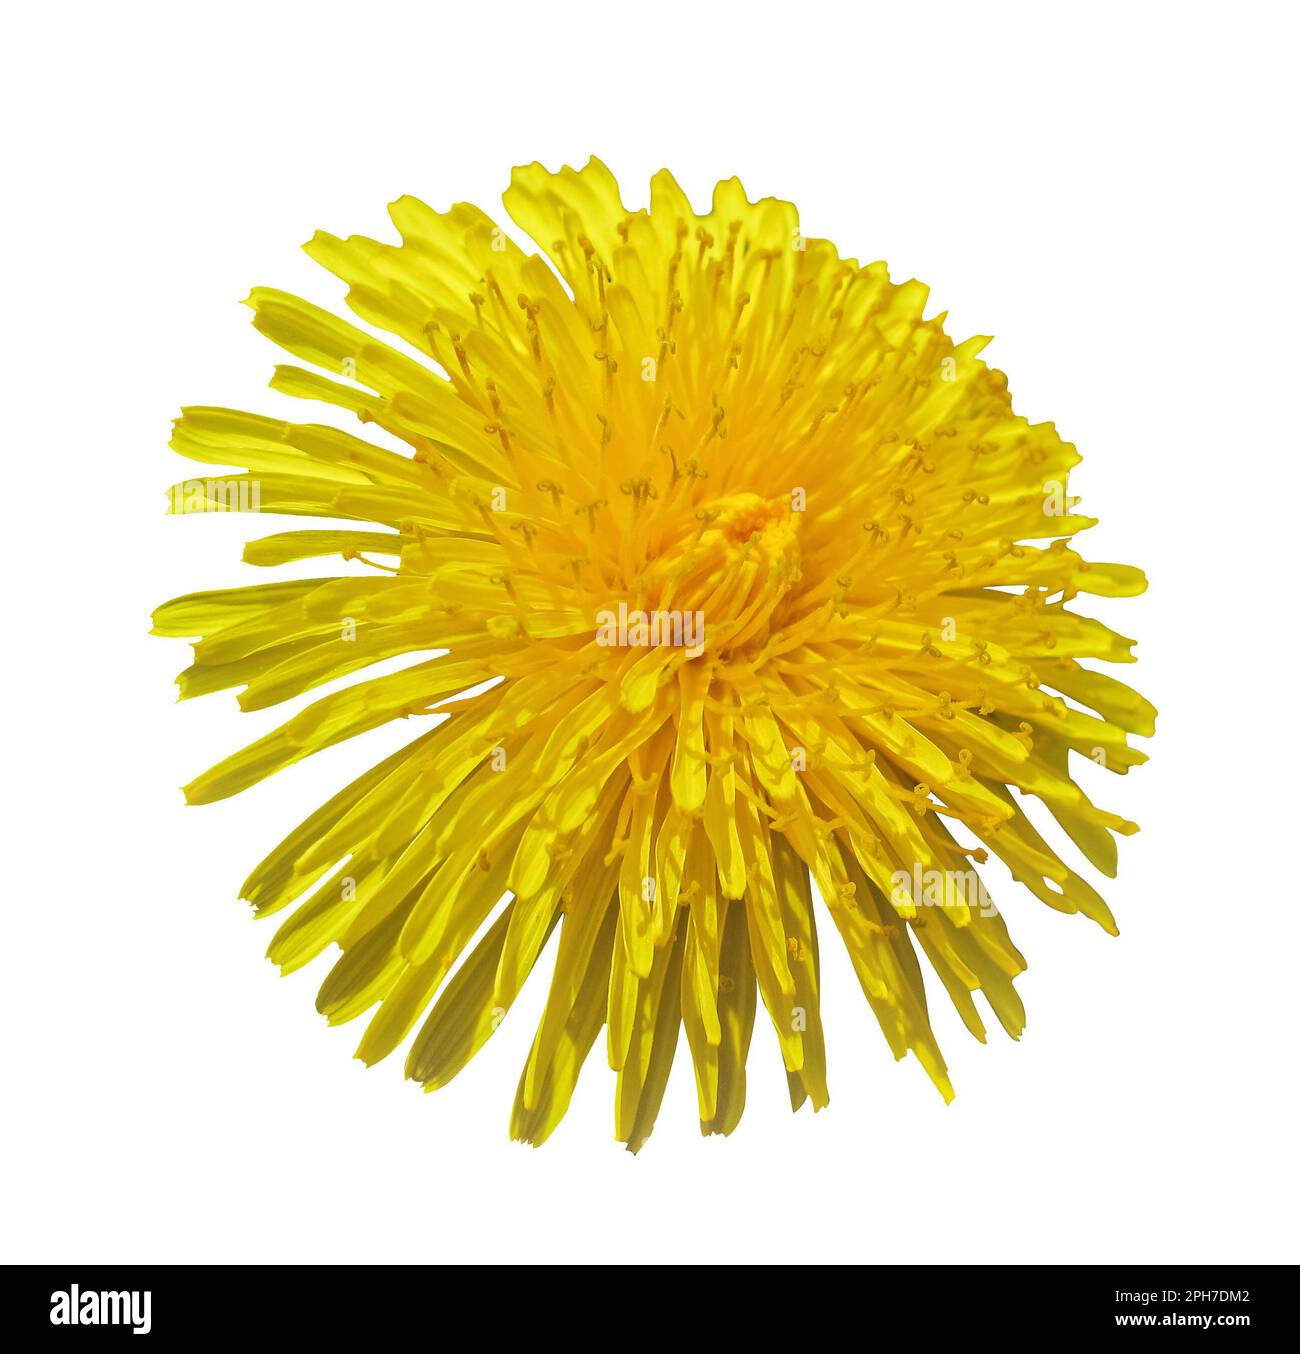 Blossoming Dandelion Yellow Head cutout isolated on white background, macro photo. Dandelion flower head with clipping path. Taraxacum head in white s Stock Photo